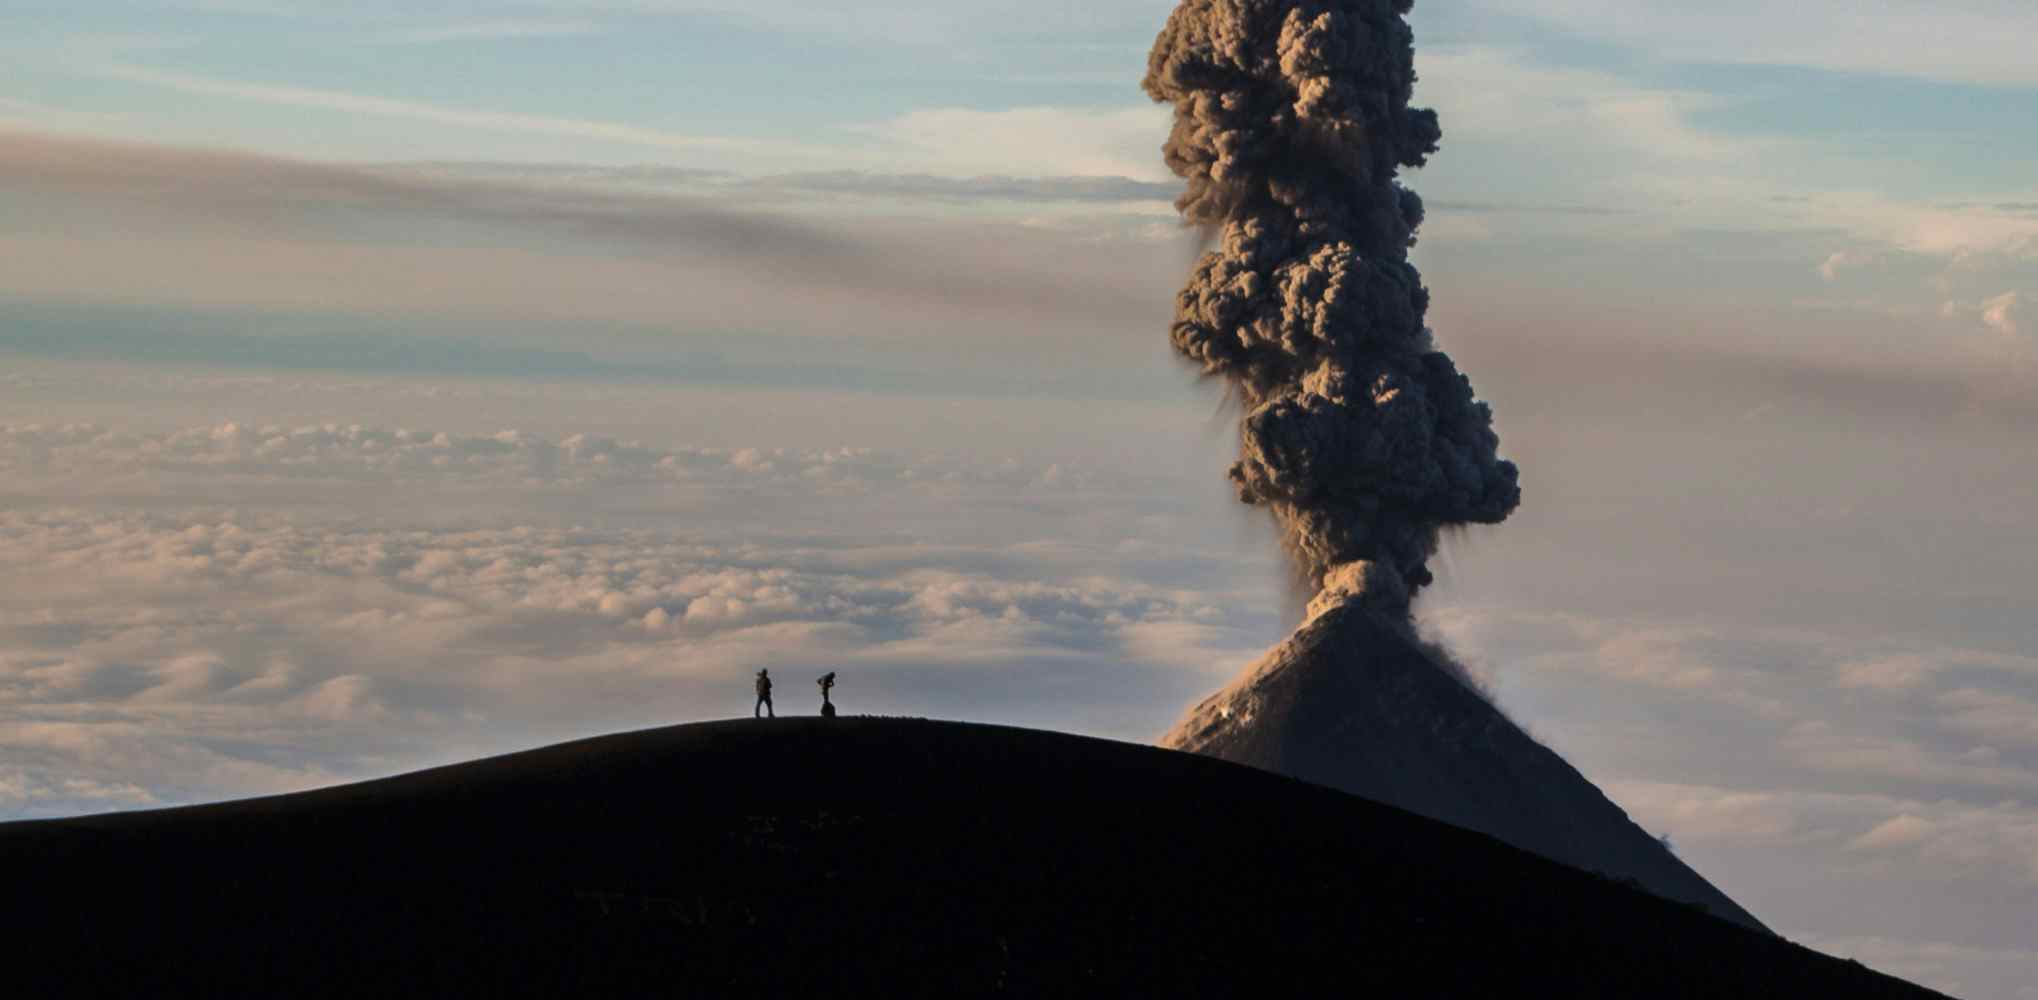 Eruption of Volcan Fuego, Guatemala, taken from summit of Volcan Acatenango just after sunrise.